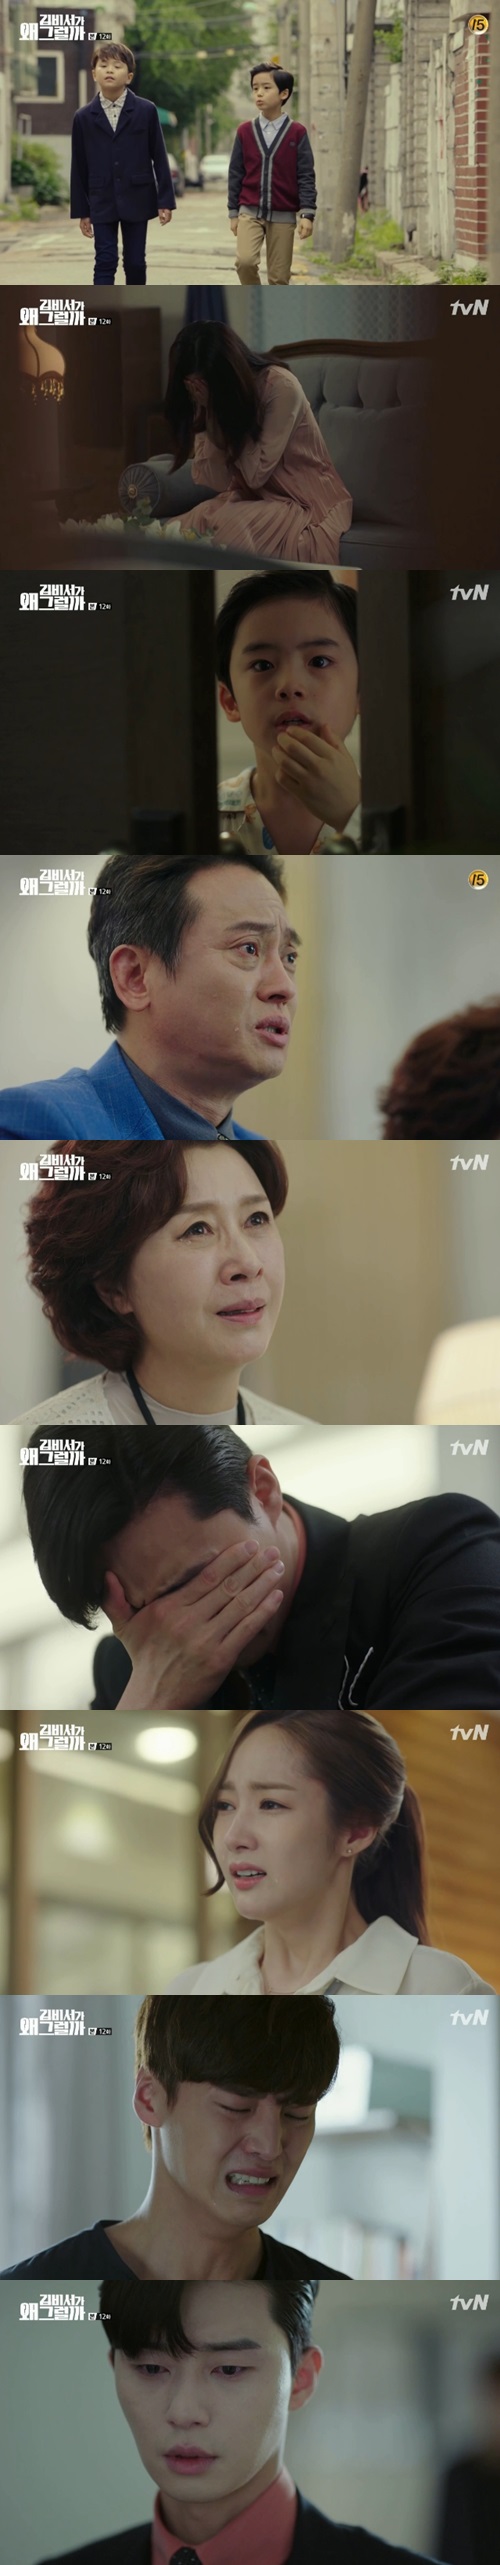 Park Seo-joons fake Amnesia and reasons for its renaming have been revealed: The sacrifice and consideration of a brother better than his brother made the sea of tears.Lee Yeongjun (Park Seo-joon) confessed to his family the reason for fake Amnesia in the 12th episode of TVNs Drama Why Secretary Kim Will Do It on July 12 (playplayplay by Jung Eun-young/directed Park Joon-hwa).Lee Yeongjun Kim Mi-so (Park Min-young) was revealed to have been kidnapped together, and Lee Yeongjun lied about losing his memory at the time of the kidnapping.Kim Mi-so told Lee Yeongjun directly, I have a question. Why did you change the name Lee Seong-hyun?And how did the artist get the wrong memory? But Lee Yeongjun did not answer.You dont have to tell me now, so we have a lot of days to be together, so please tell me slowly, Kim said.Soon, Lee (Kim Byung-ok) and Choi (Kim Hye-ok) came to the office and the curiosity was solved.Lees wife, Choi, came to hear Lee Yeongjun did not lose her memory through Lee Sung-yeon (Lee Tae-hwan).Like Kim Mi-so, the two men also asked Lee Yeongjun why.In the past, Lee Yeongjun went to the redevelopment area with his brother Lee Sung-yeon, and Lee Sung-yeon ran away with Lee Yeongjun, who was thirsty, waiting for a drink.Lee Yeongjun, who was waiting for his brother alone, approached the kidnapper and asked him to carry the heavy load together, and handed him yogurt.Drinking the yogurt and Lee Yeongjun being abducted as it is.When Lee Yeongjun disappeared, his father Lee asked his son Lee Sung-yeon, Where did you leave your brother? Lee Sung-yeon was rebuked for seeing that Lee Yeongjuns ankle, which he returned, had a scar that would not disappear for a lifetime.At the end, Lee started to suffer from delusions that he was kidnapped, not Lee Yeongjun, and fought with Lee Yeongjun every day.Lee tried to send his son Lee Sung-yeon to a mental hospital when he heard a baseball bat, and Choi said, I want to die.Lee Yeongjun, who heard the words, took an action against Amnesia from the very next day, fearing that his mother, Choi, would commit suicide like a kidnapper.Lee Yeongjun apologized to Lee Sung-yeon first, saying, My brother was kidnapped because of me? I can not remember anything.Lee and Choi later found out that they had burdened Lee Yeongjun too much and poured tears of regret and sorry.Kim Mi-so also tried to run a car errand and heard all the words and shed tears.But Lee Sung-yeon, who learned all the truth, also resented Lee Yeongjun, saying, I hated you because of your arrogant judgment and wrote half of my life to feel sorry for myself.Lee Yeongjun said, I thought it was best for me to pretend that I lost Memory.I thought it would be okay to live under the new name Lee Yeongjun instead of the name Lee Seong-hyun, which made my brother more confused.But I thought that if I was suffering from hearing my mother who had lived in guilt for the rest of my life, I should have overcome it all together. Yoo Gyeong-sang